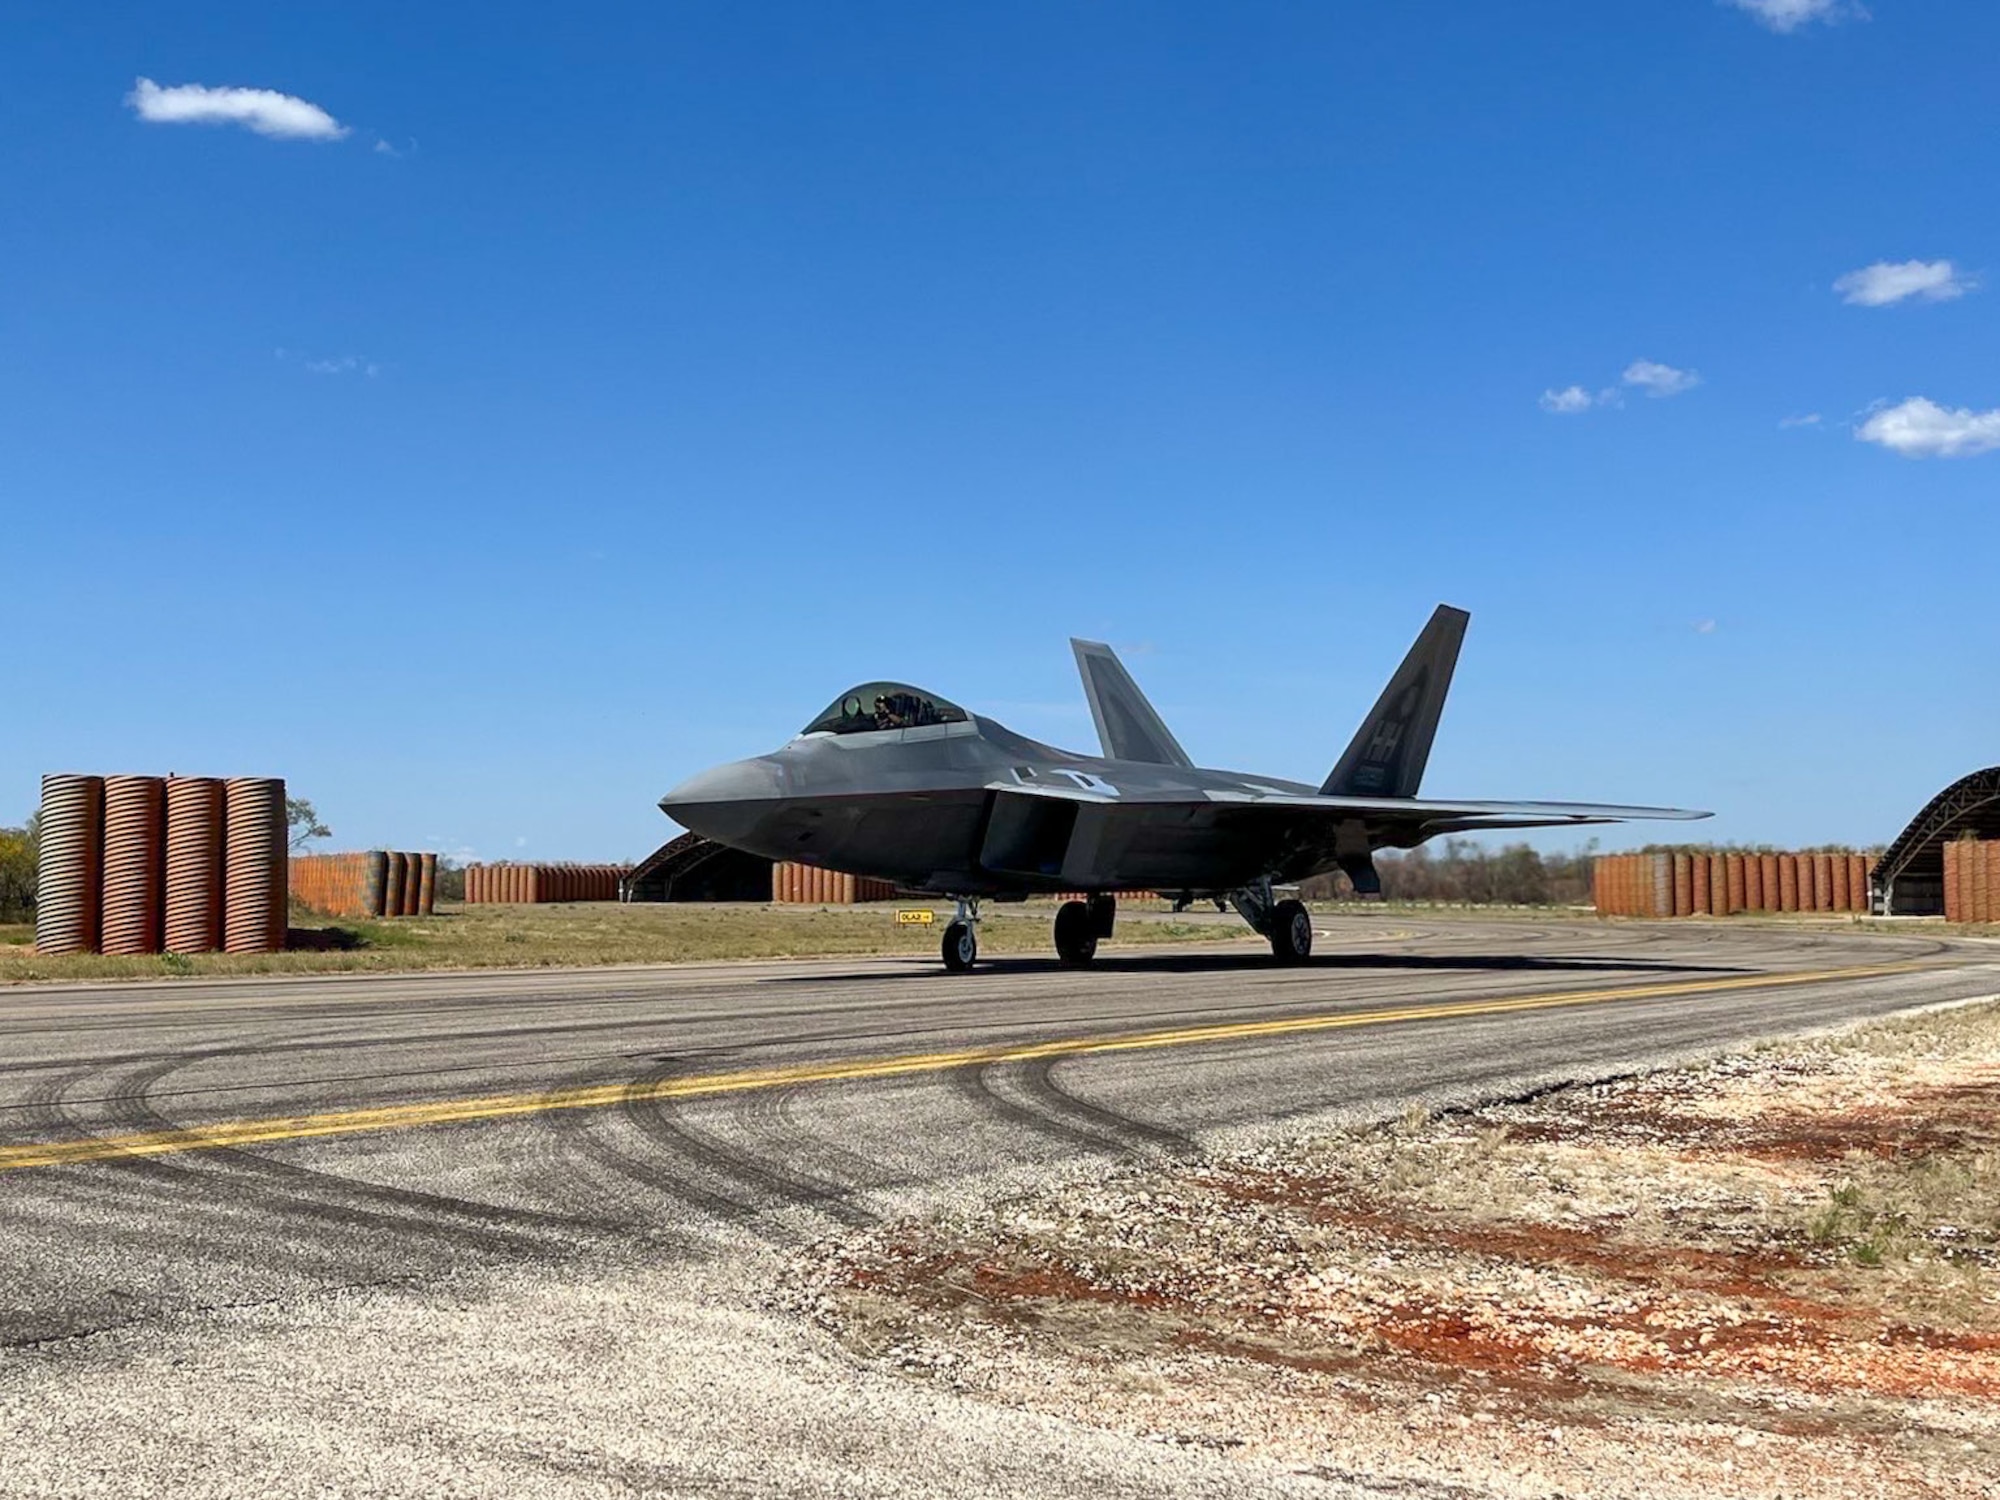 A U.S. Air Force F-22 Raptor from the 199th Air Expeditionary Squadron, known as the Hawaiian Raptors Squadron, comprised of the 19th and the 199th Fighter Squadrons, taxis during Talisman Sabre 23 at Royal Australian Air Force Base Curtin, Western Australia, Australia, Aug. 2, 2023. Talisman Sabre is the U.S.’s largest bilateral exercise in Australia that demonstrates the capability to rapidly deploy and operate to accomplish a wide range of missions alongside joint and allied partners to ensure a free and open Indo-Pacific. (U.S. Air Force photo by Senior Airman Jai Kurihara-Alfonso)